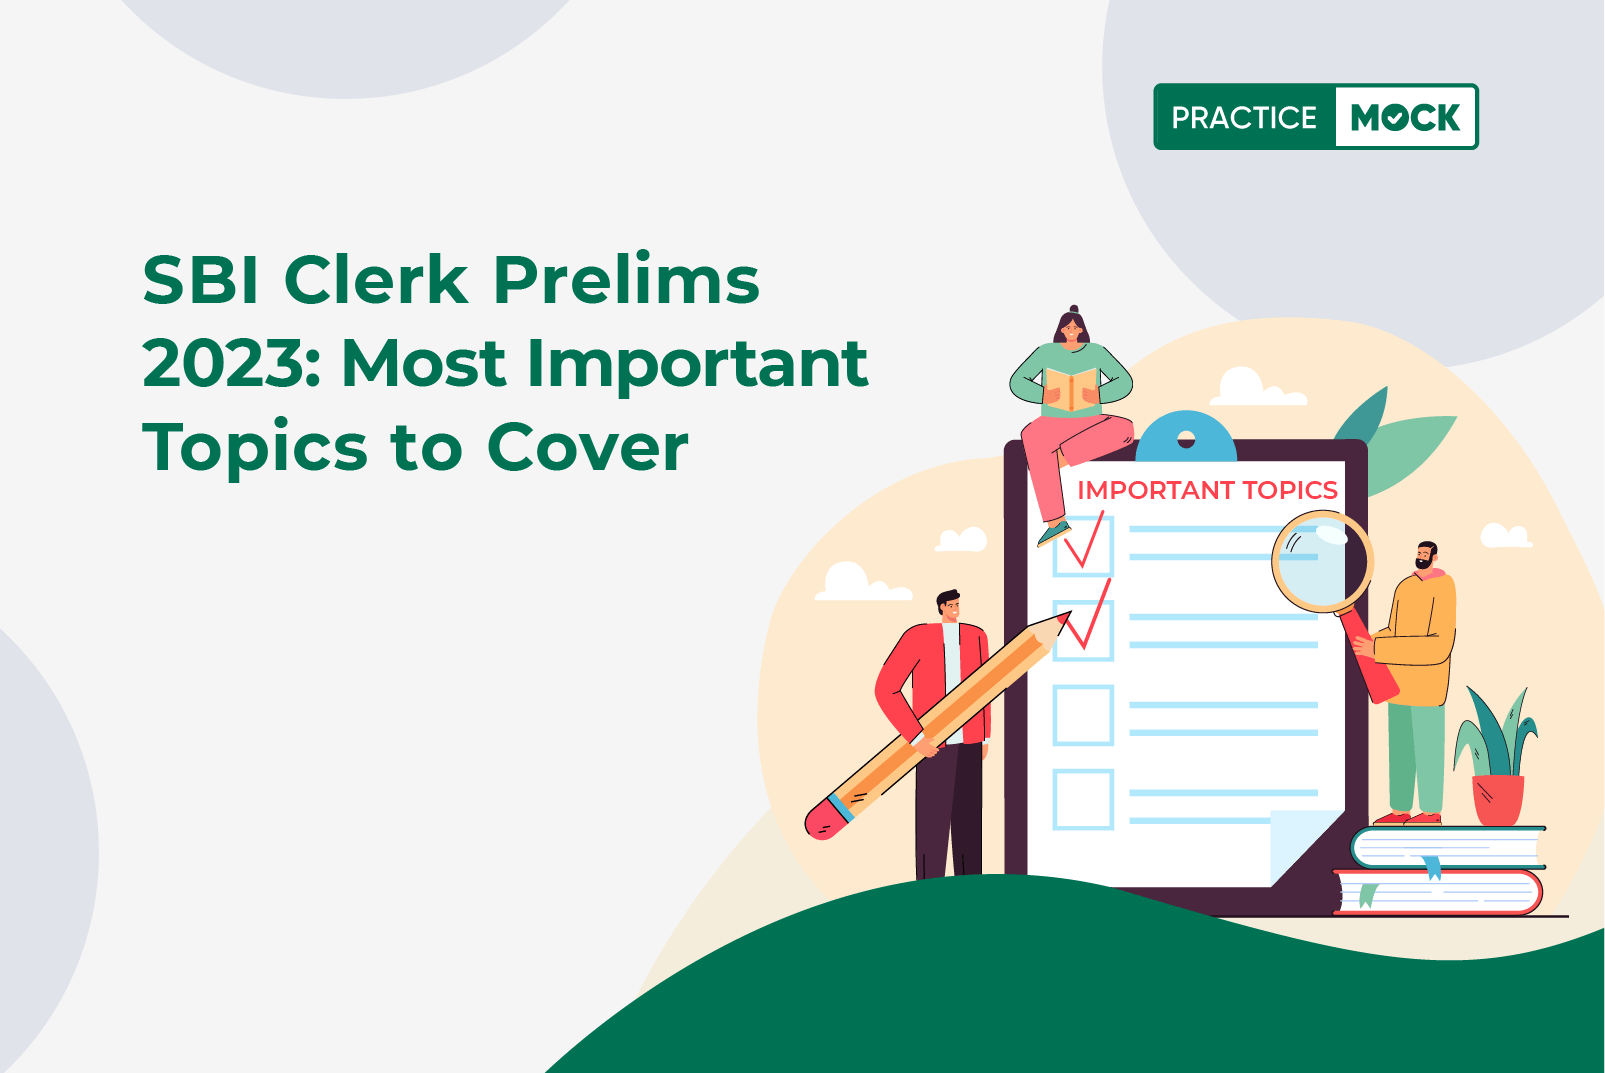 SBI Clerk Prelims 2023 Success Guide: Most Important Topics to Cover